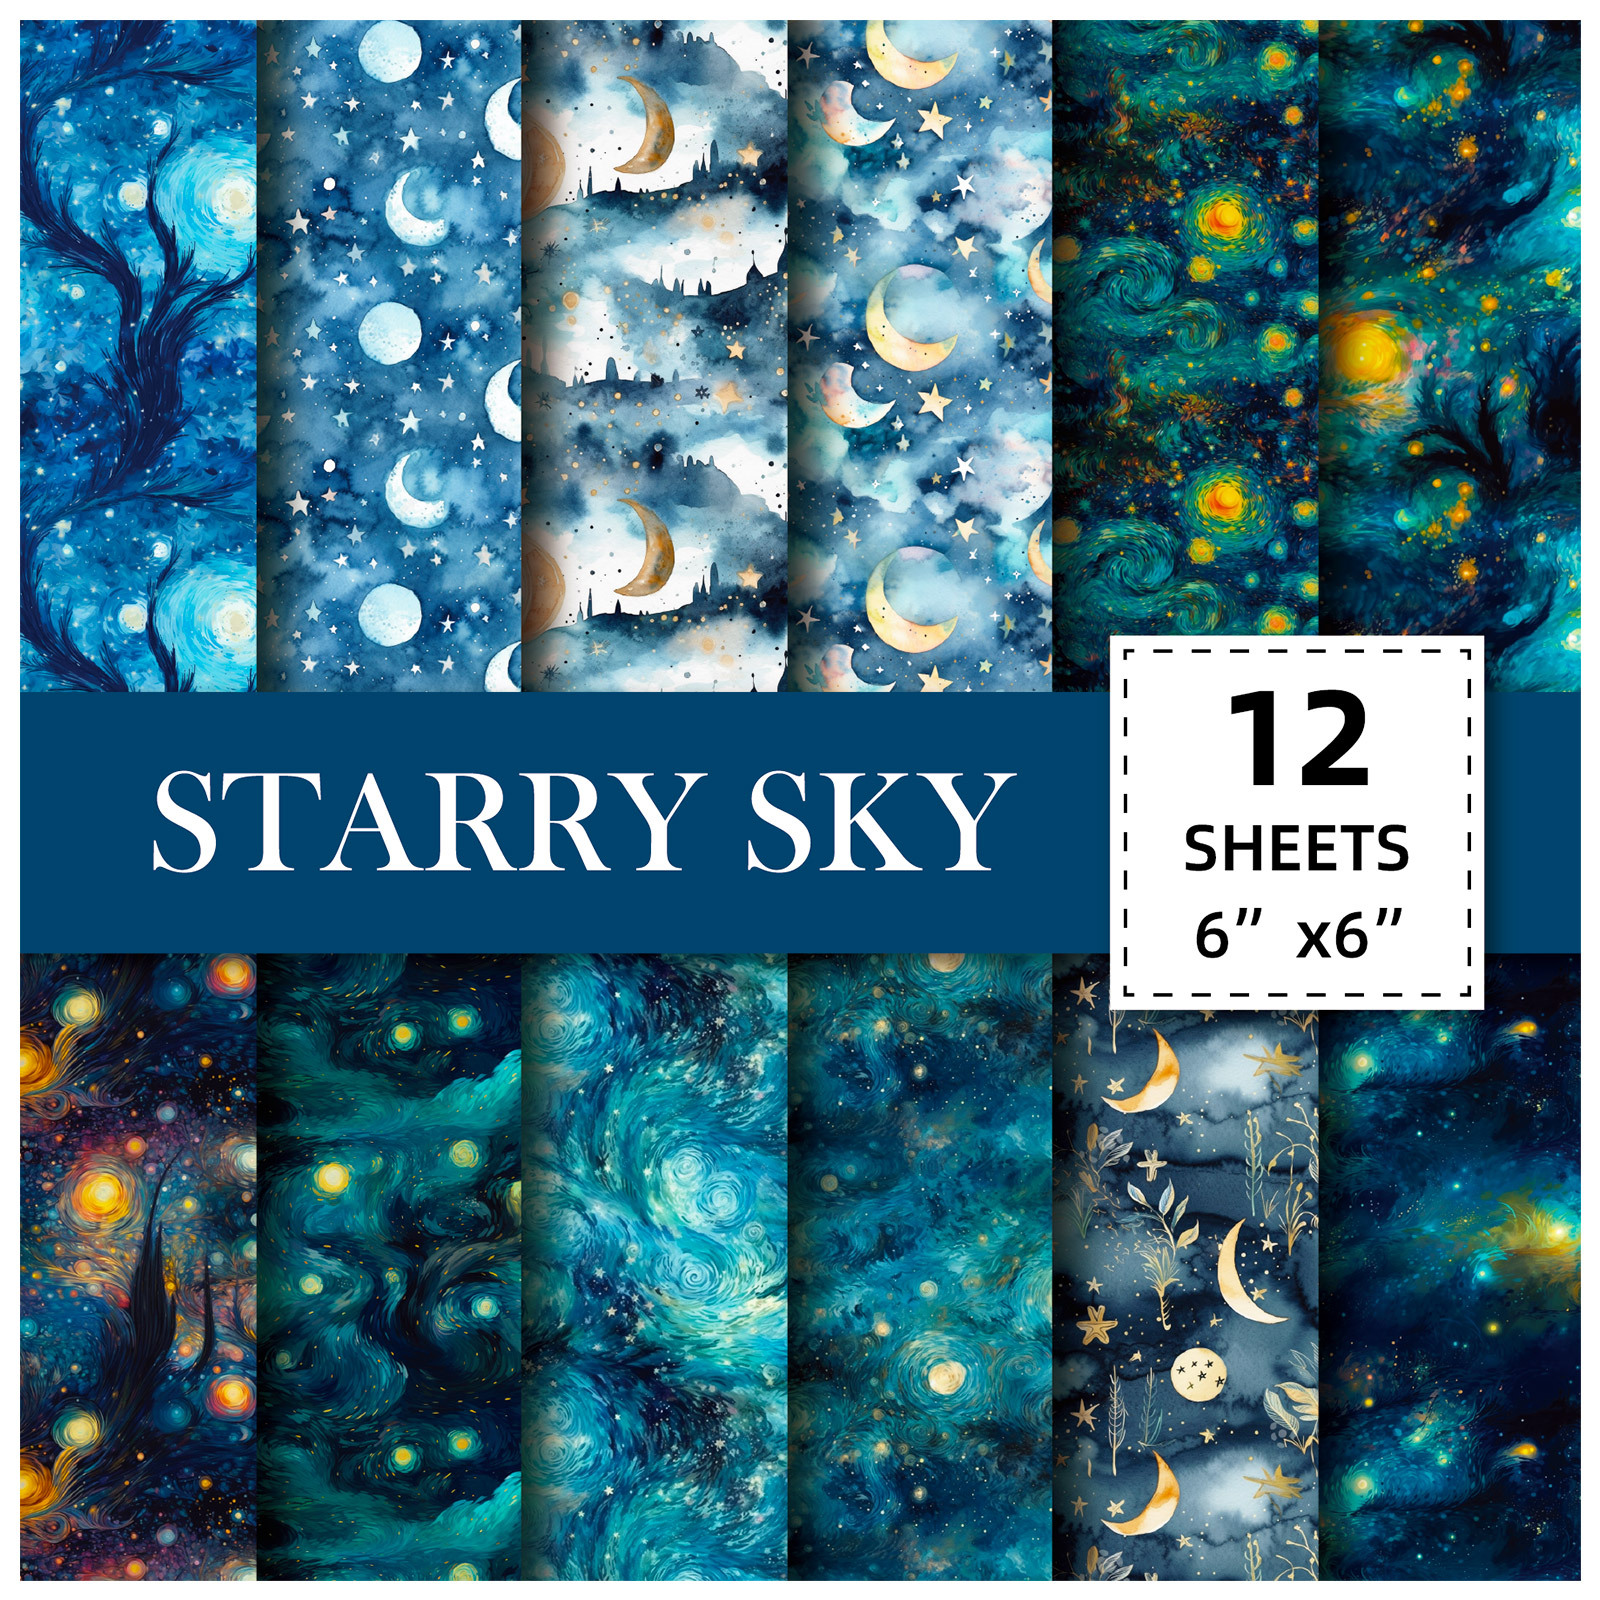 Starry Blue Skies Scrapbook Paper Pack - 12 Sheets for Beautiful DIY Craft & Journal Projects,  6-Inch Patterned Cardstock